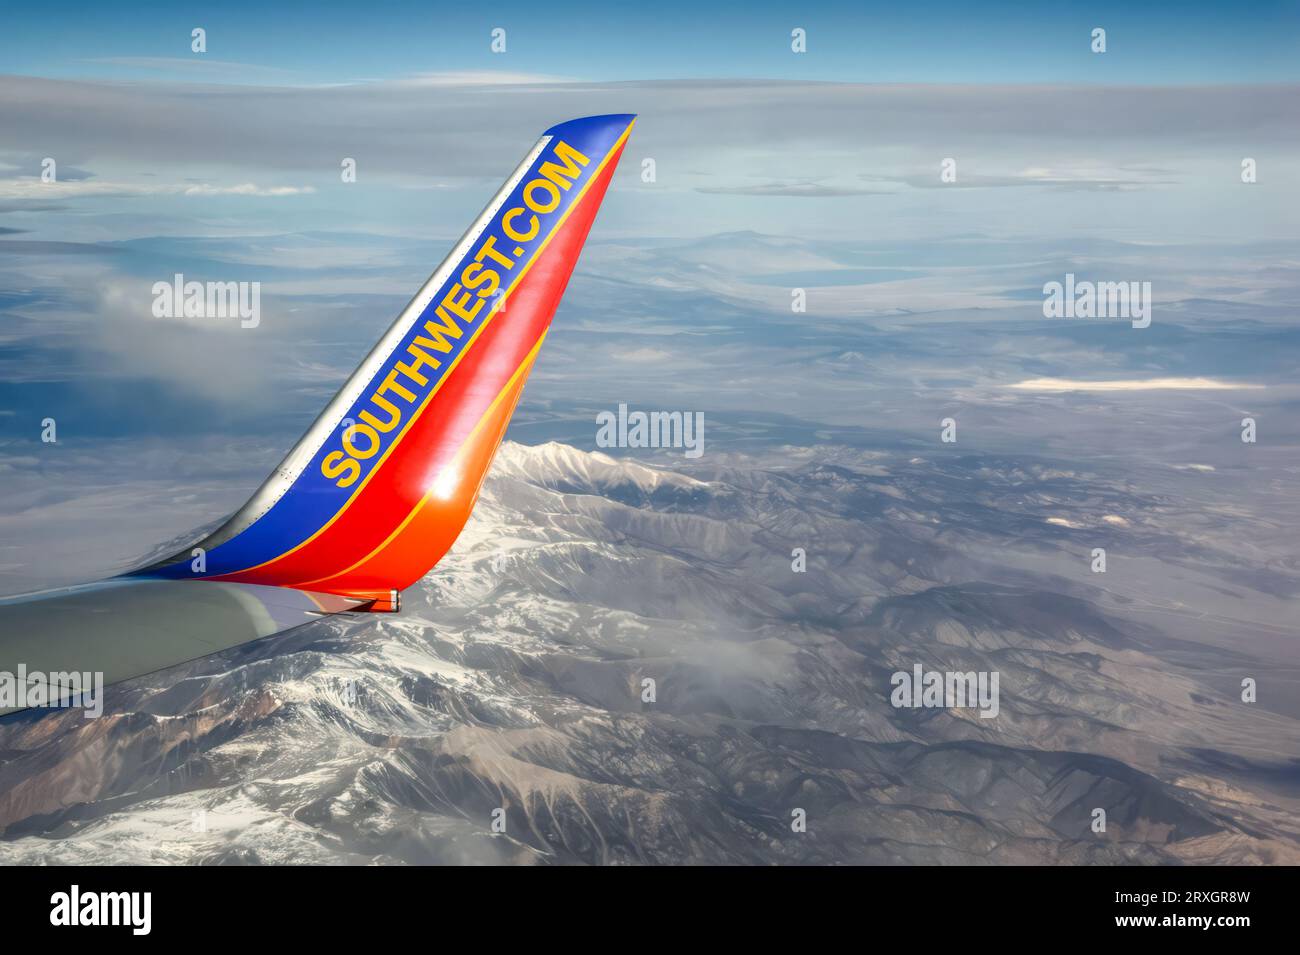 A wing tip of Southwest Airlines Boeing 737 flying over snow-capped mountains. The blue and orange colors contrast with snowy peaks and clear sky. The image captures Southwest's spirit of adventure. Stock Photo